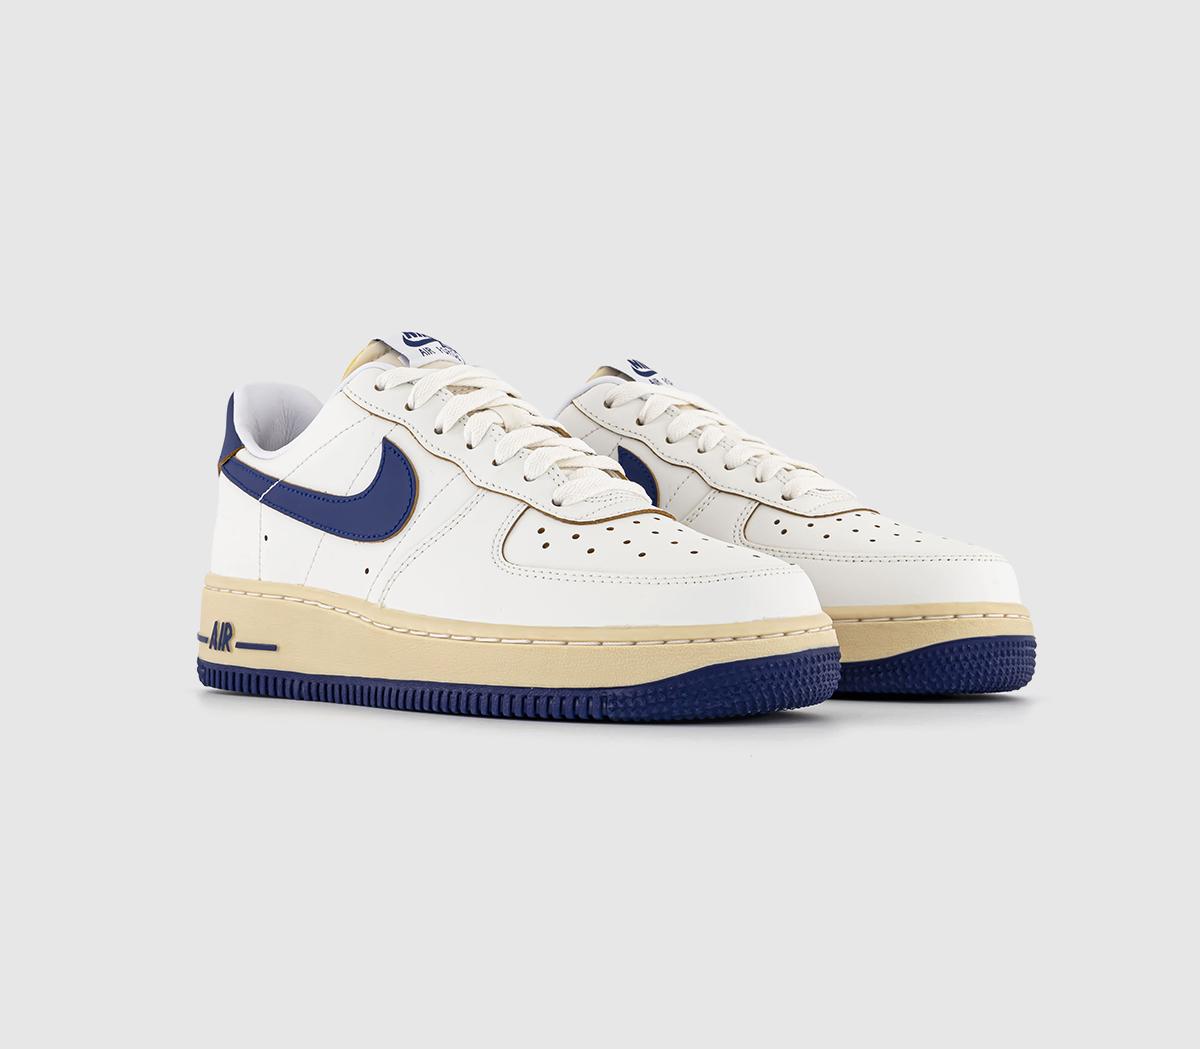 Nike Womens Air Force 1 07 Trainers Sail Deep Royal Blue Pale Vanilla Gold Suede White, 6